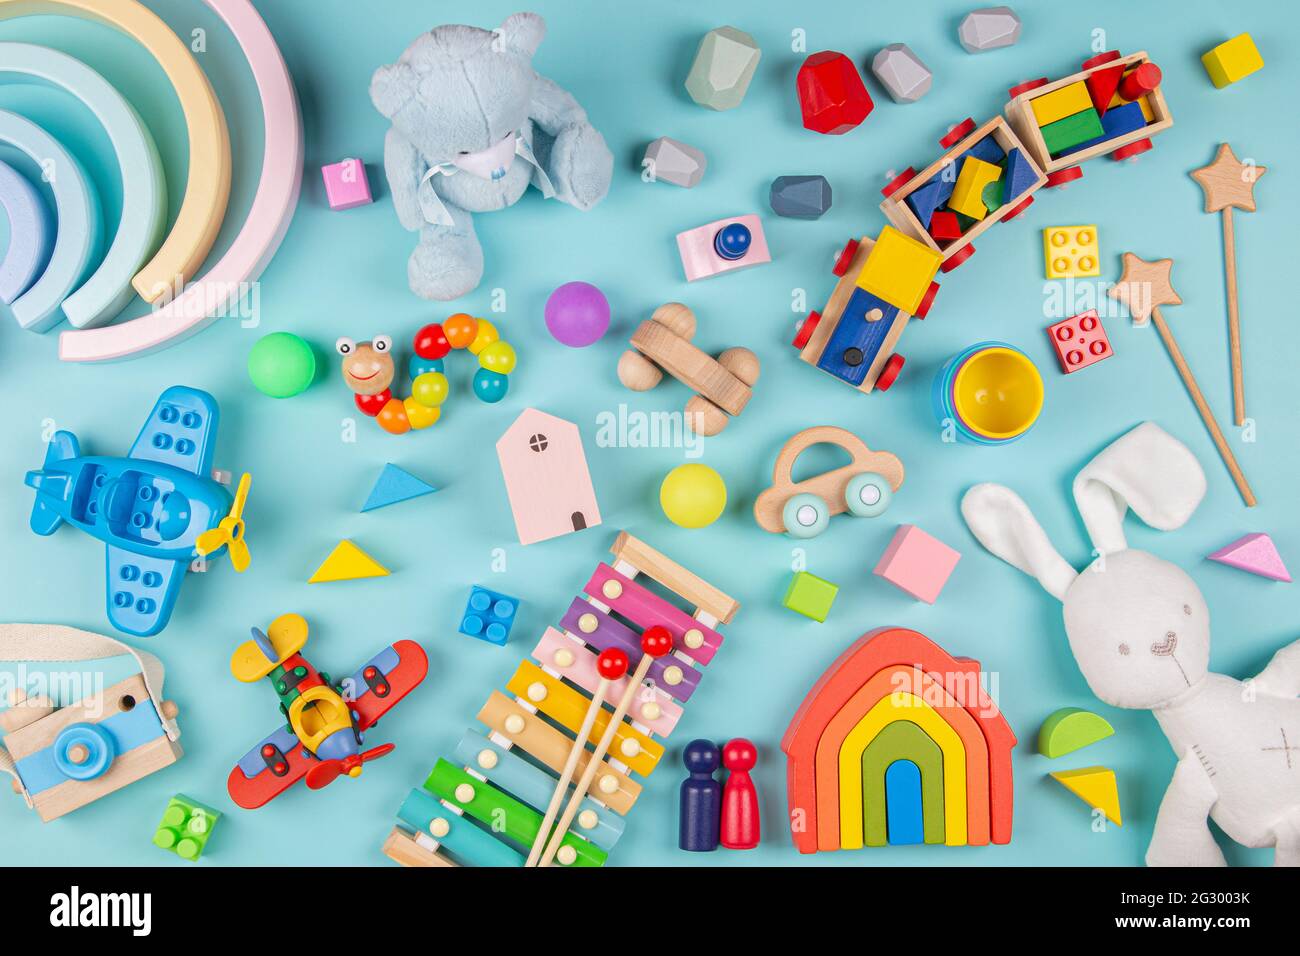 Baby kids toys pattern. Set of colorful educational wooden and fluffy toys on blue background. Top view, flat lay Stock Photo